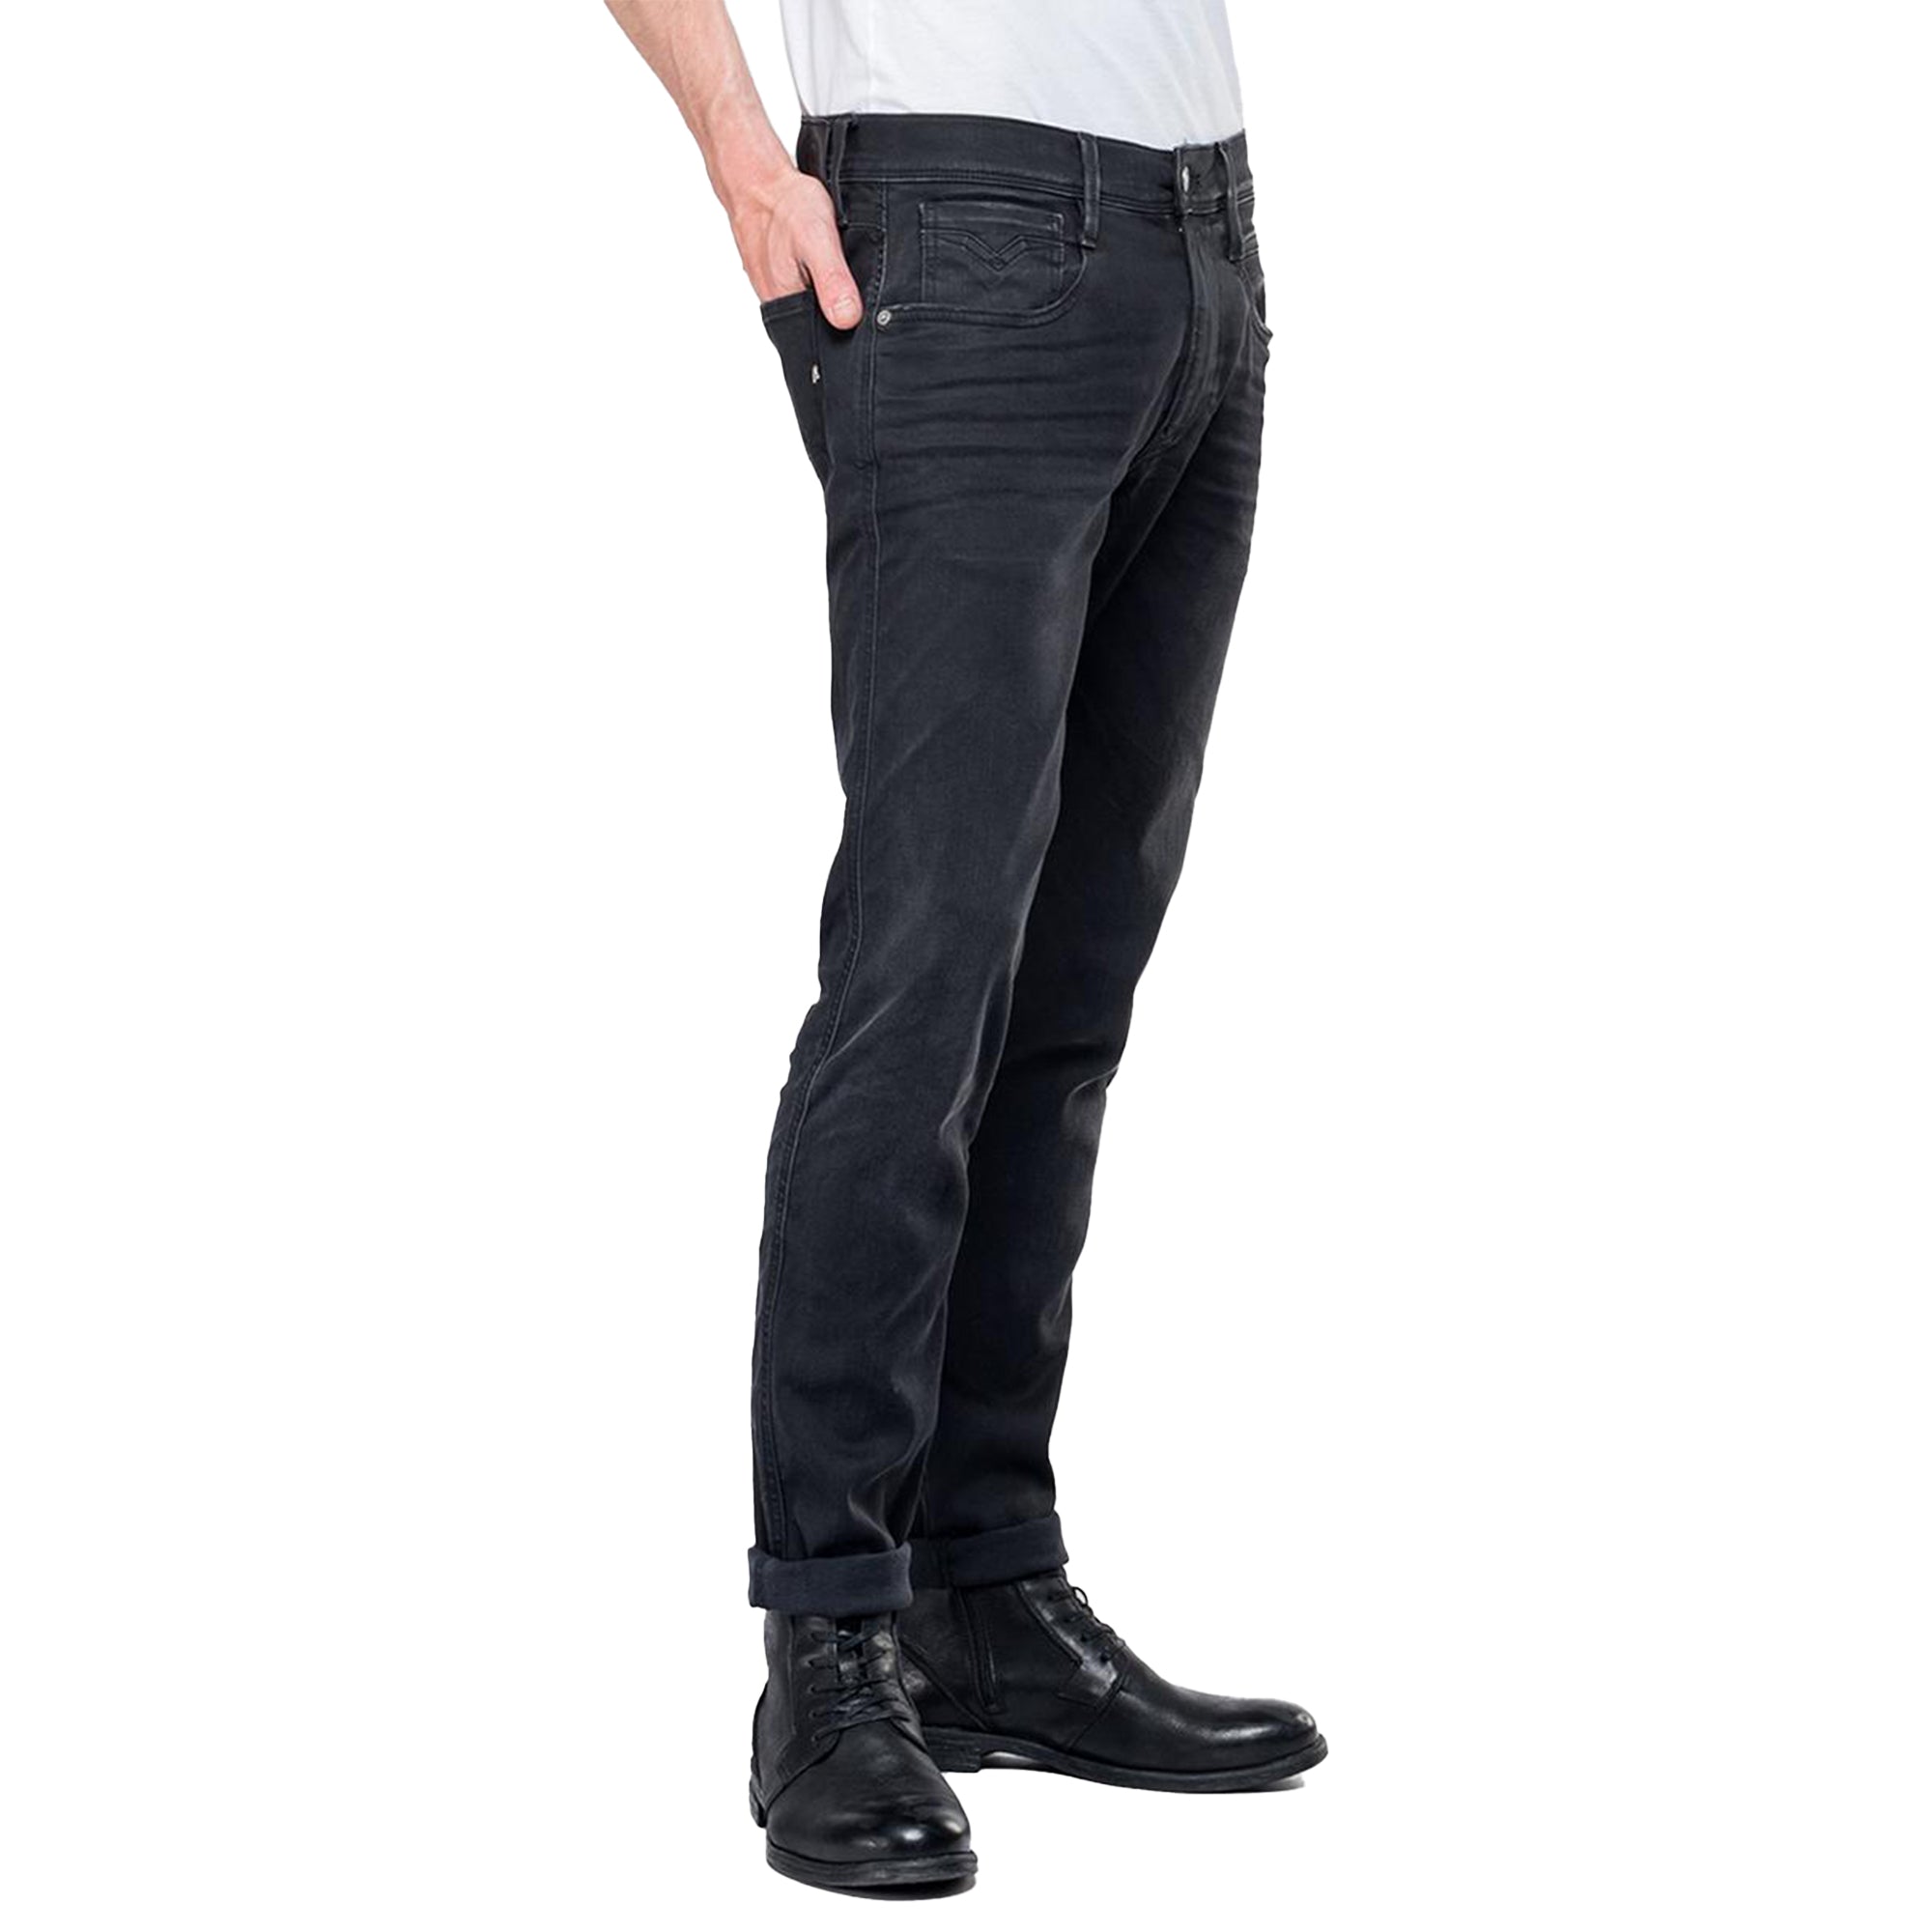 Replay Hyperflex Anbass CLOUDS Edition Slim Fit Jeans - Washed Black